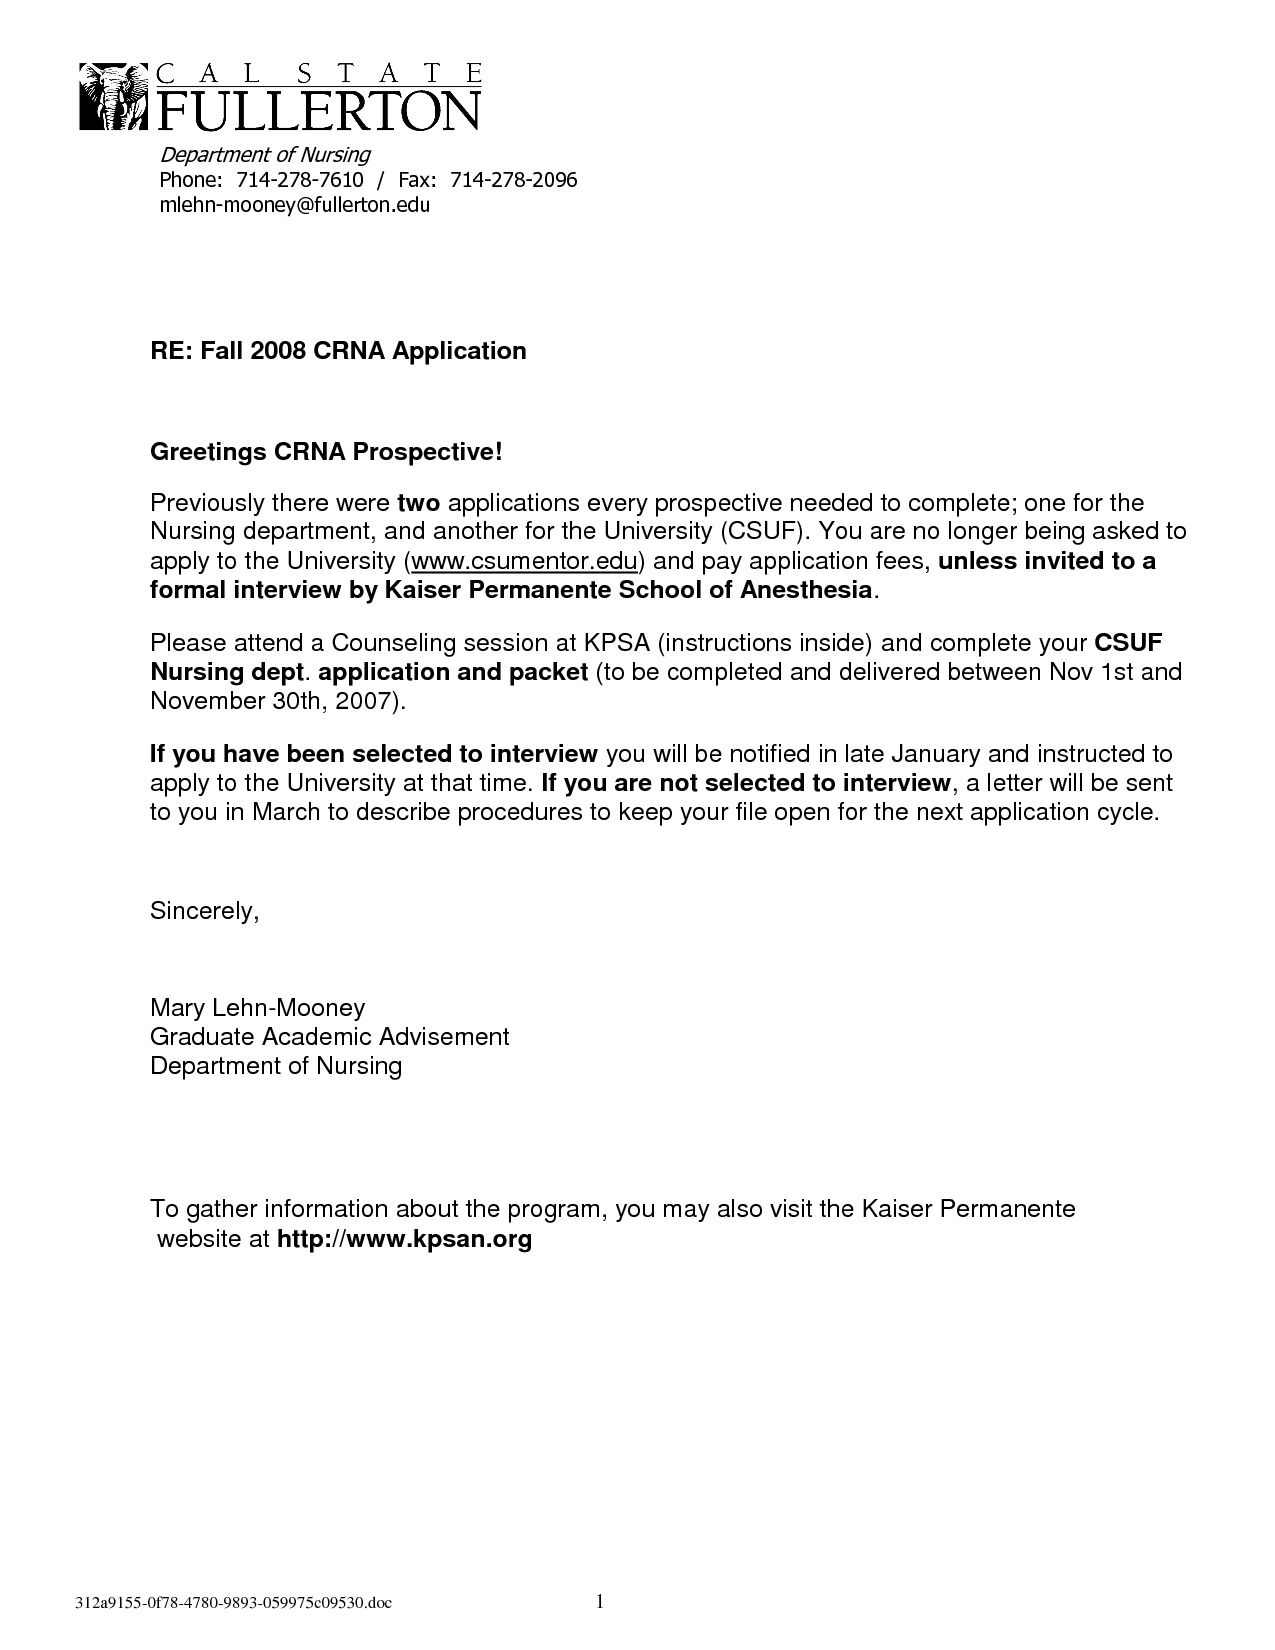 Nursing Recommendation Letter From Supervisor Domaregroup within measurements 1275 X 1650